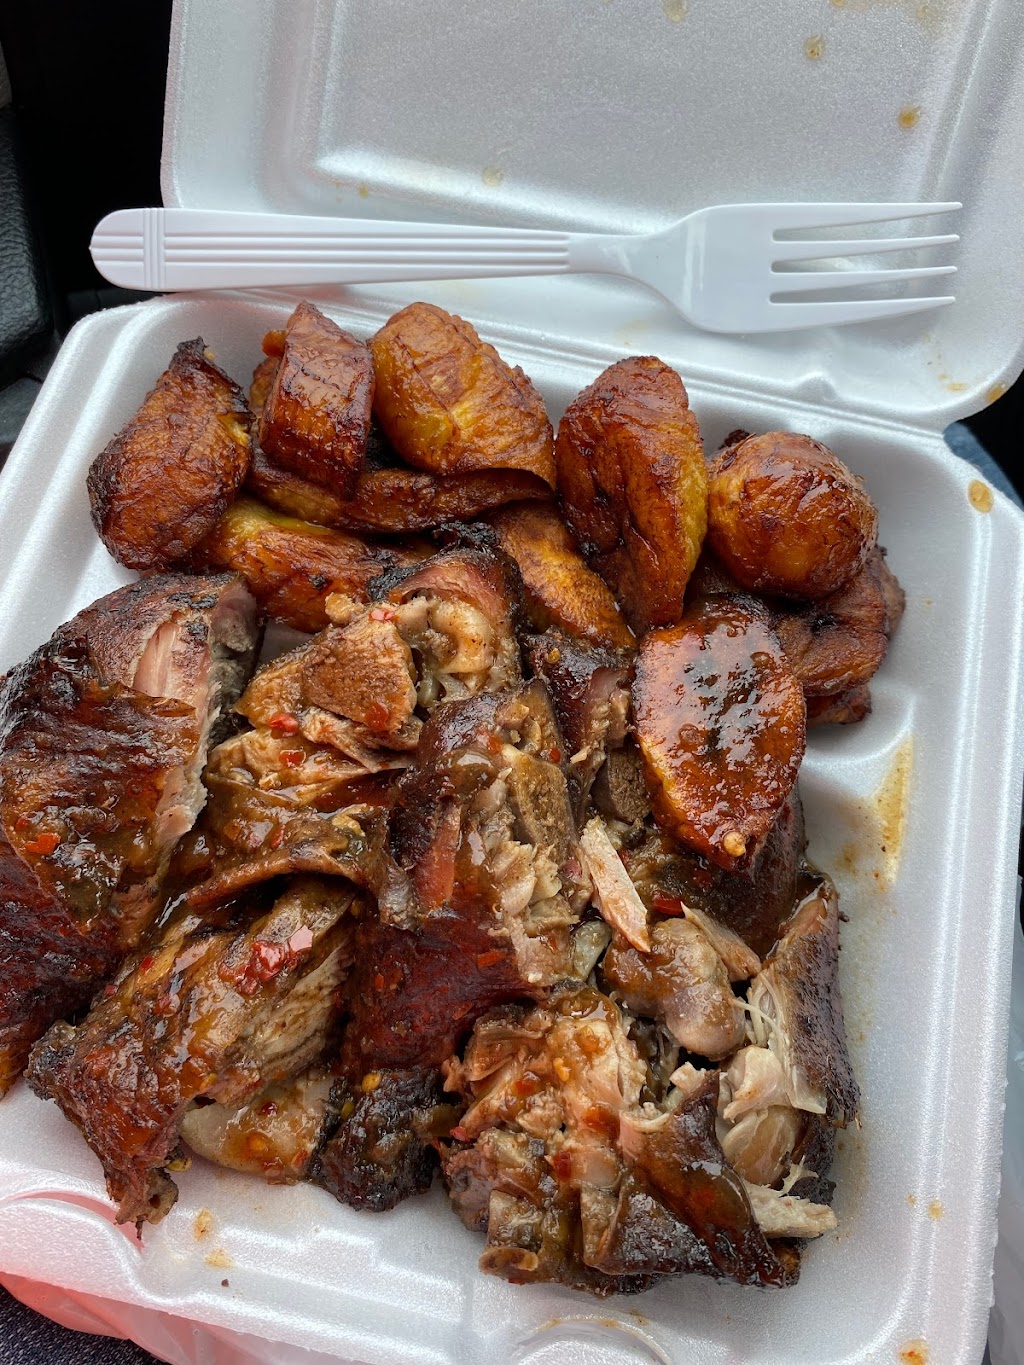 OBs Jamaican Restaurant | 920 W 2nd St, Chester, PA 19013 | Phone: (610) 874-4530